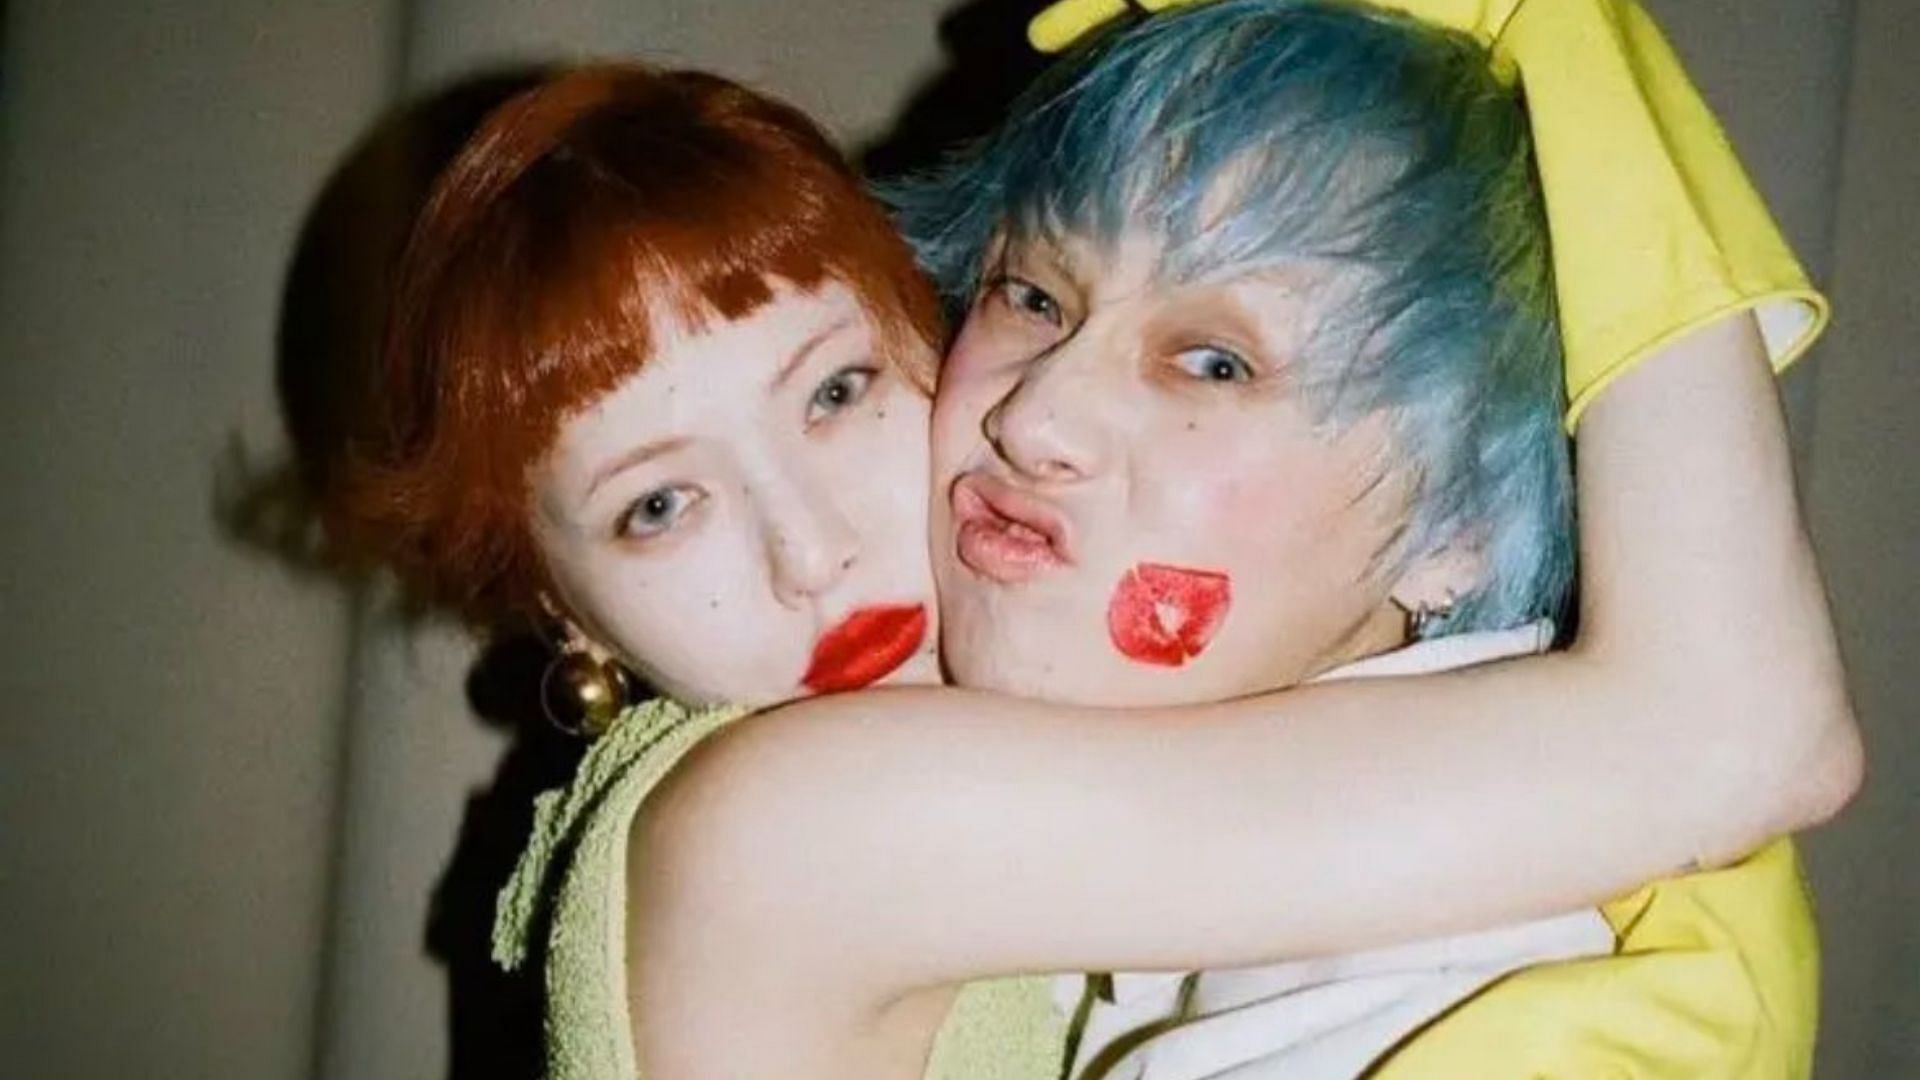 HyunA and Dawn reveal they have broken up (Image via Twitter/@punkbyelle)